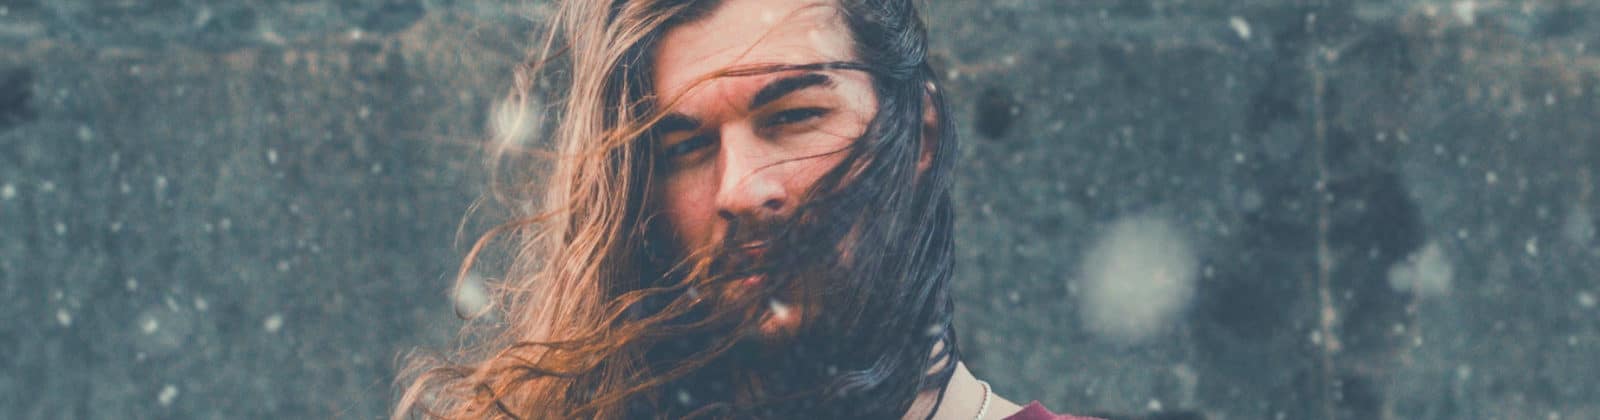 51 Hairstyles For Men With Long Hair 2020